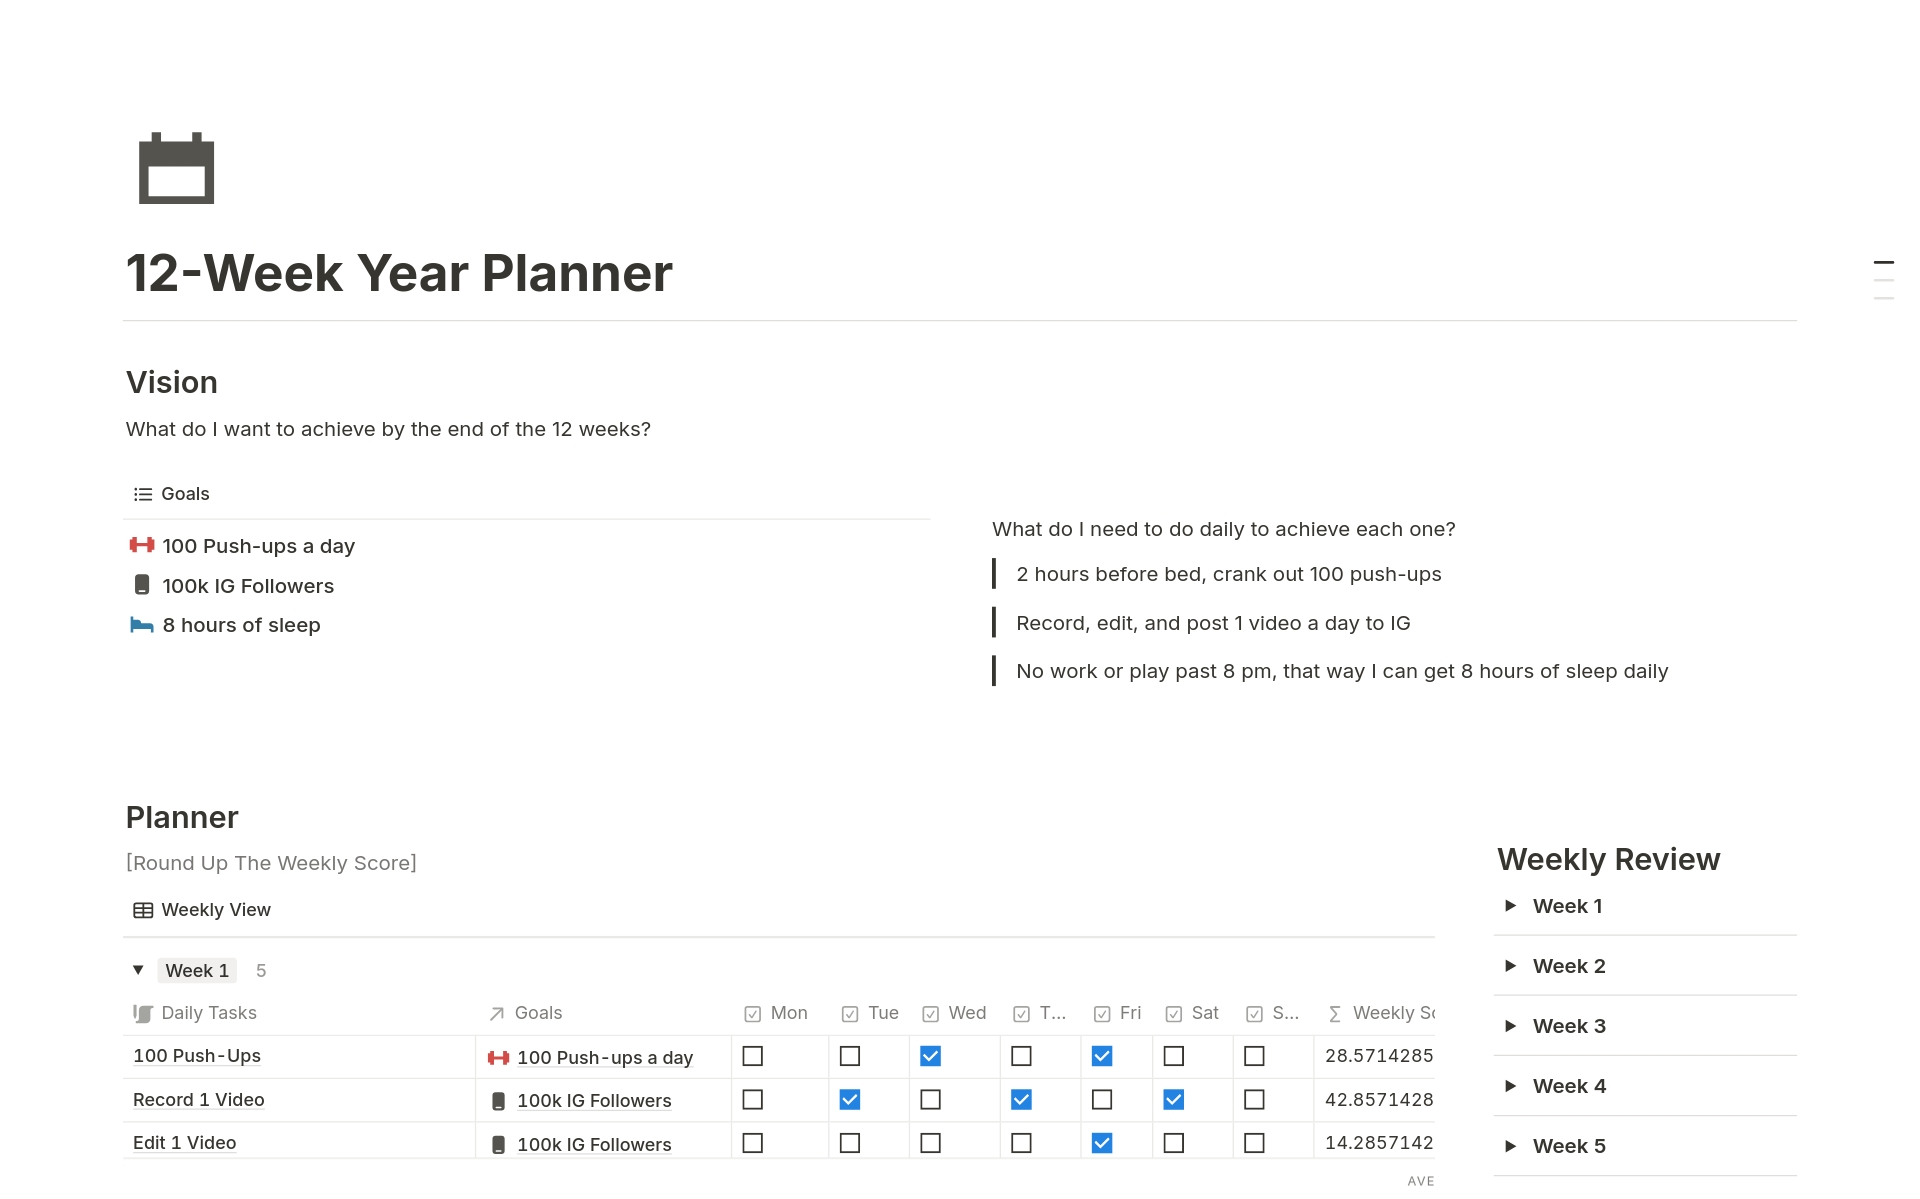 I got tired of all the bloated 12-week year planners so I made this. A user-friendly and efficient template to help me achieve my goals and track my progress towards a successful 12-week Year.